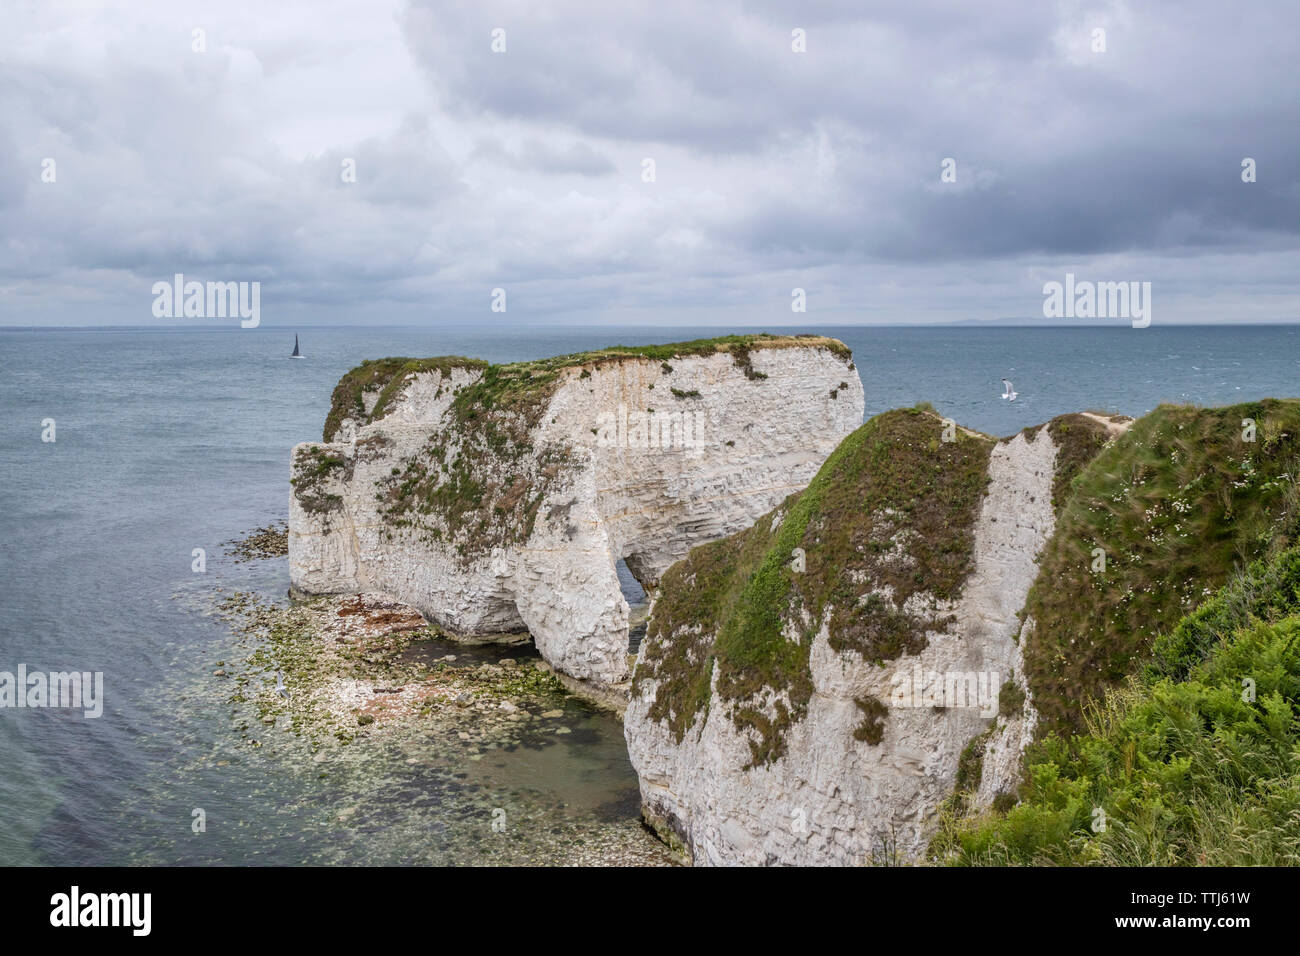 Old Harry Rocks at Handfast Point, Isle of Purbeck, Jurassic Coast, a UNESCO World Heritage Site in Dorset, England, UK Stock Photo